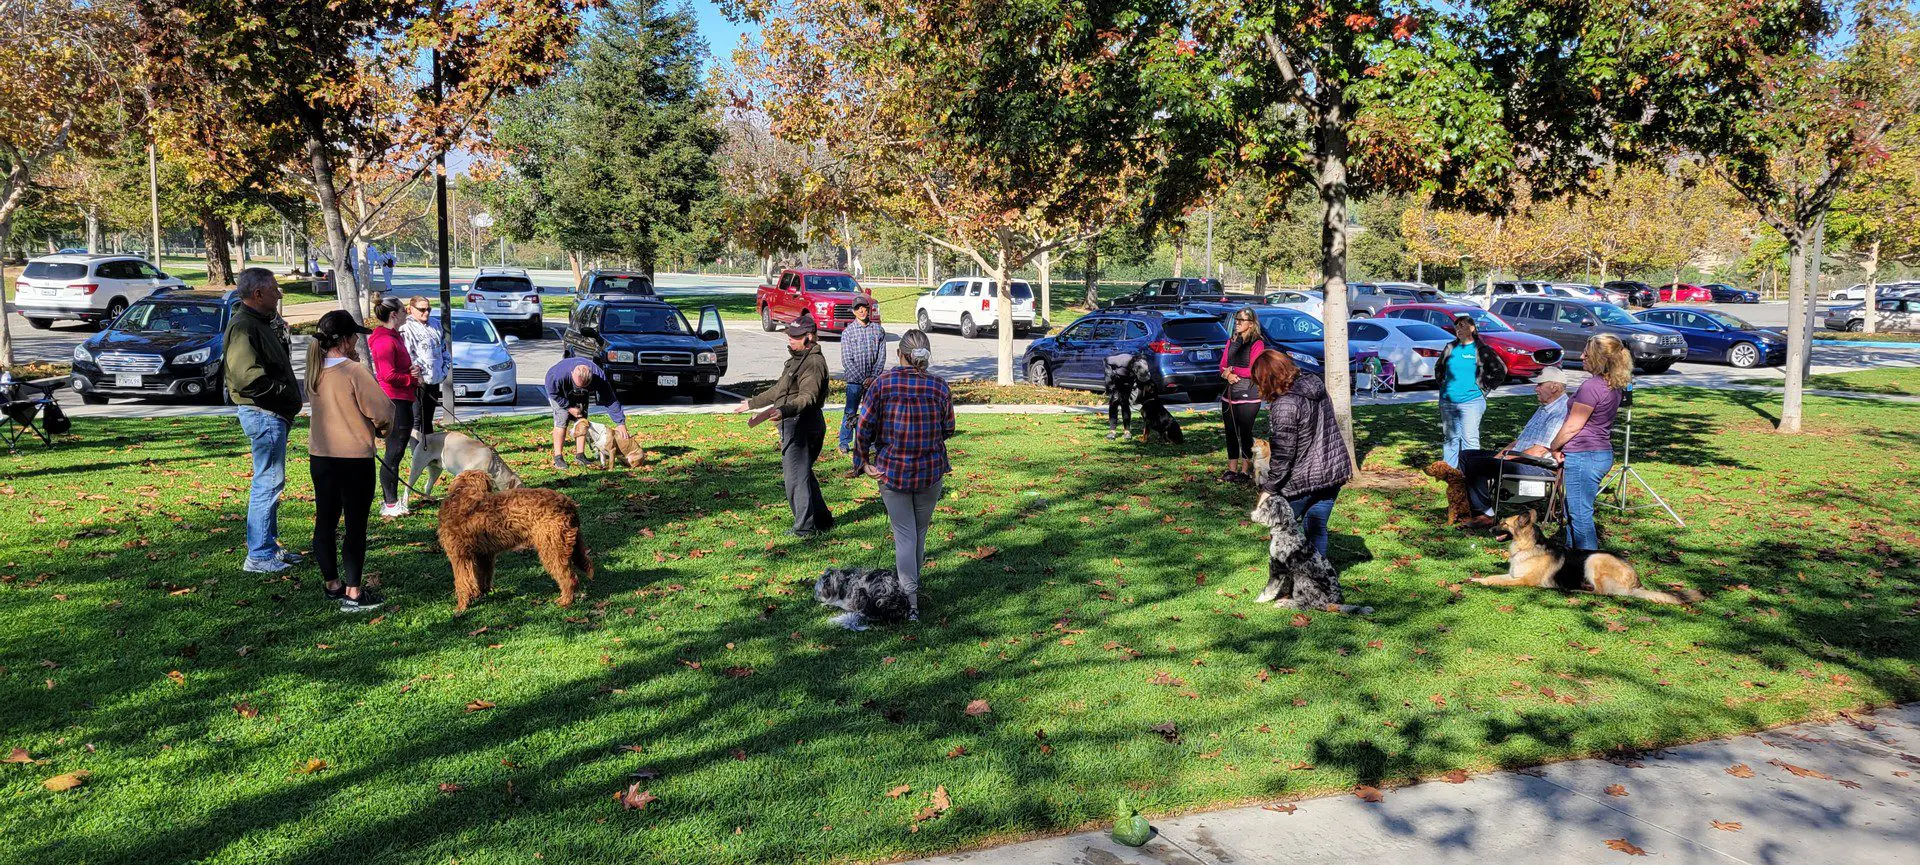 A group of people walking their dogs in the park.